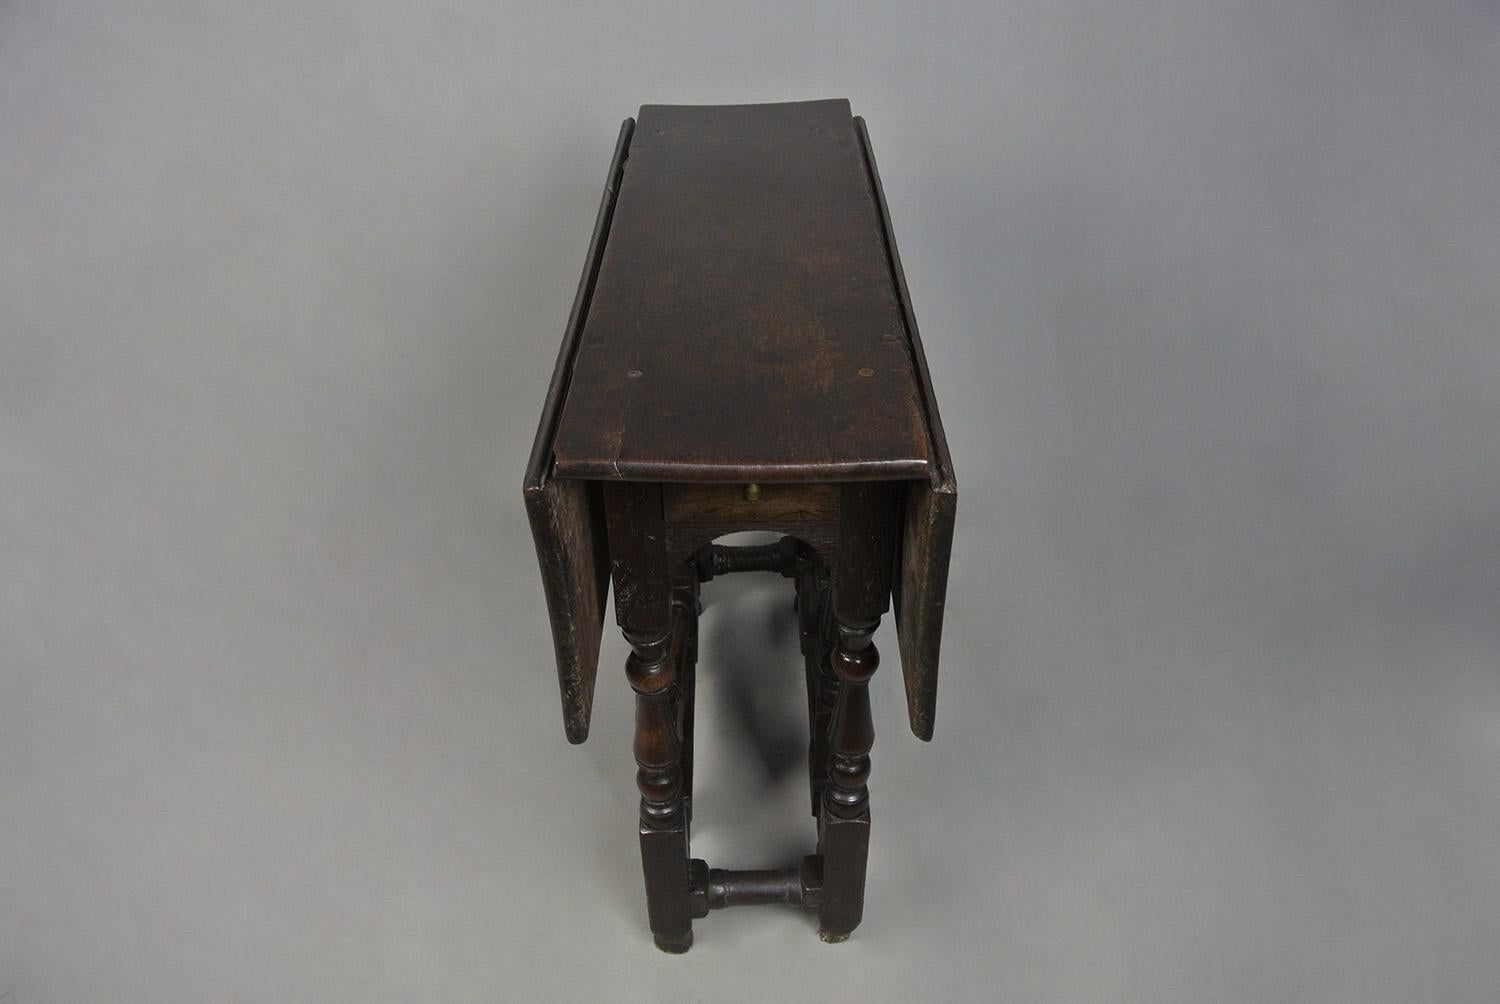 Original Queen Anne Oak Small Supper Table with Provenance c. 1700 For Sale 4